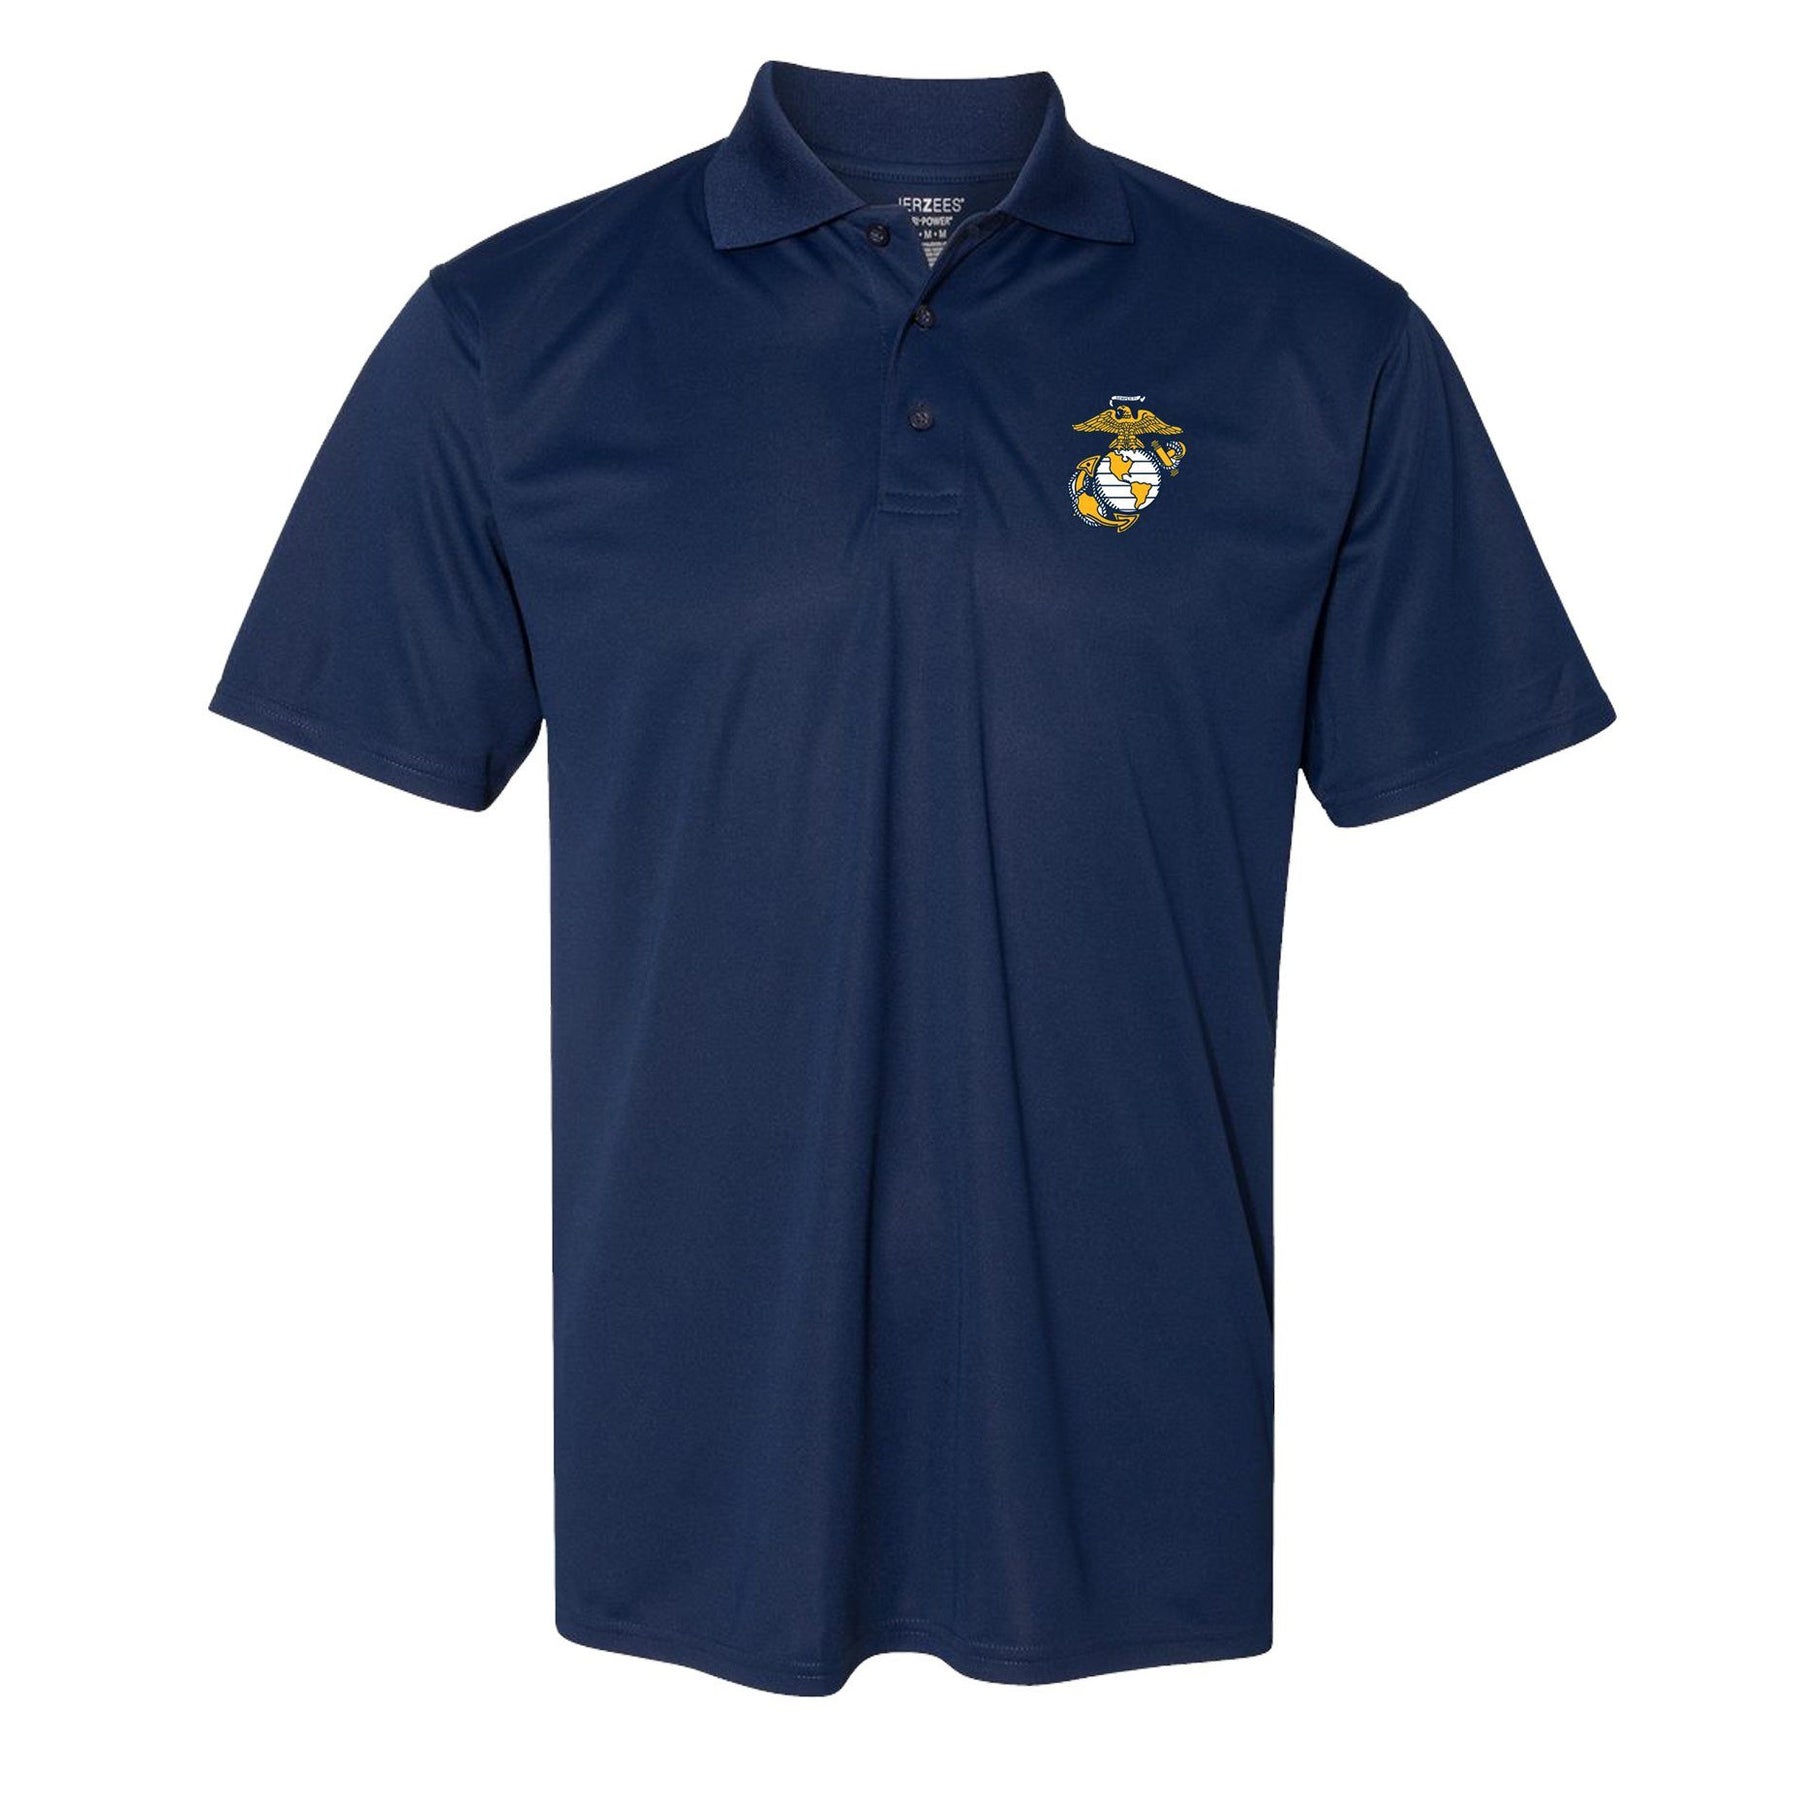 COMBAT CHARGED EGA Screen Printed Dri-Fit Performance Polo - Marine Corps Direct